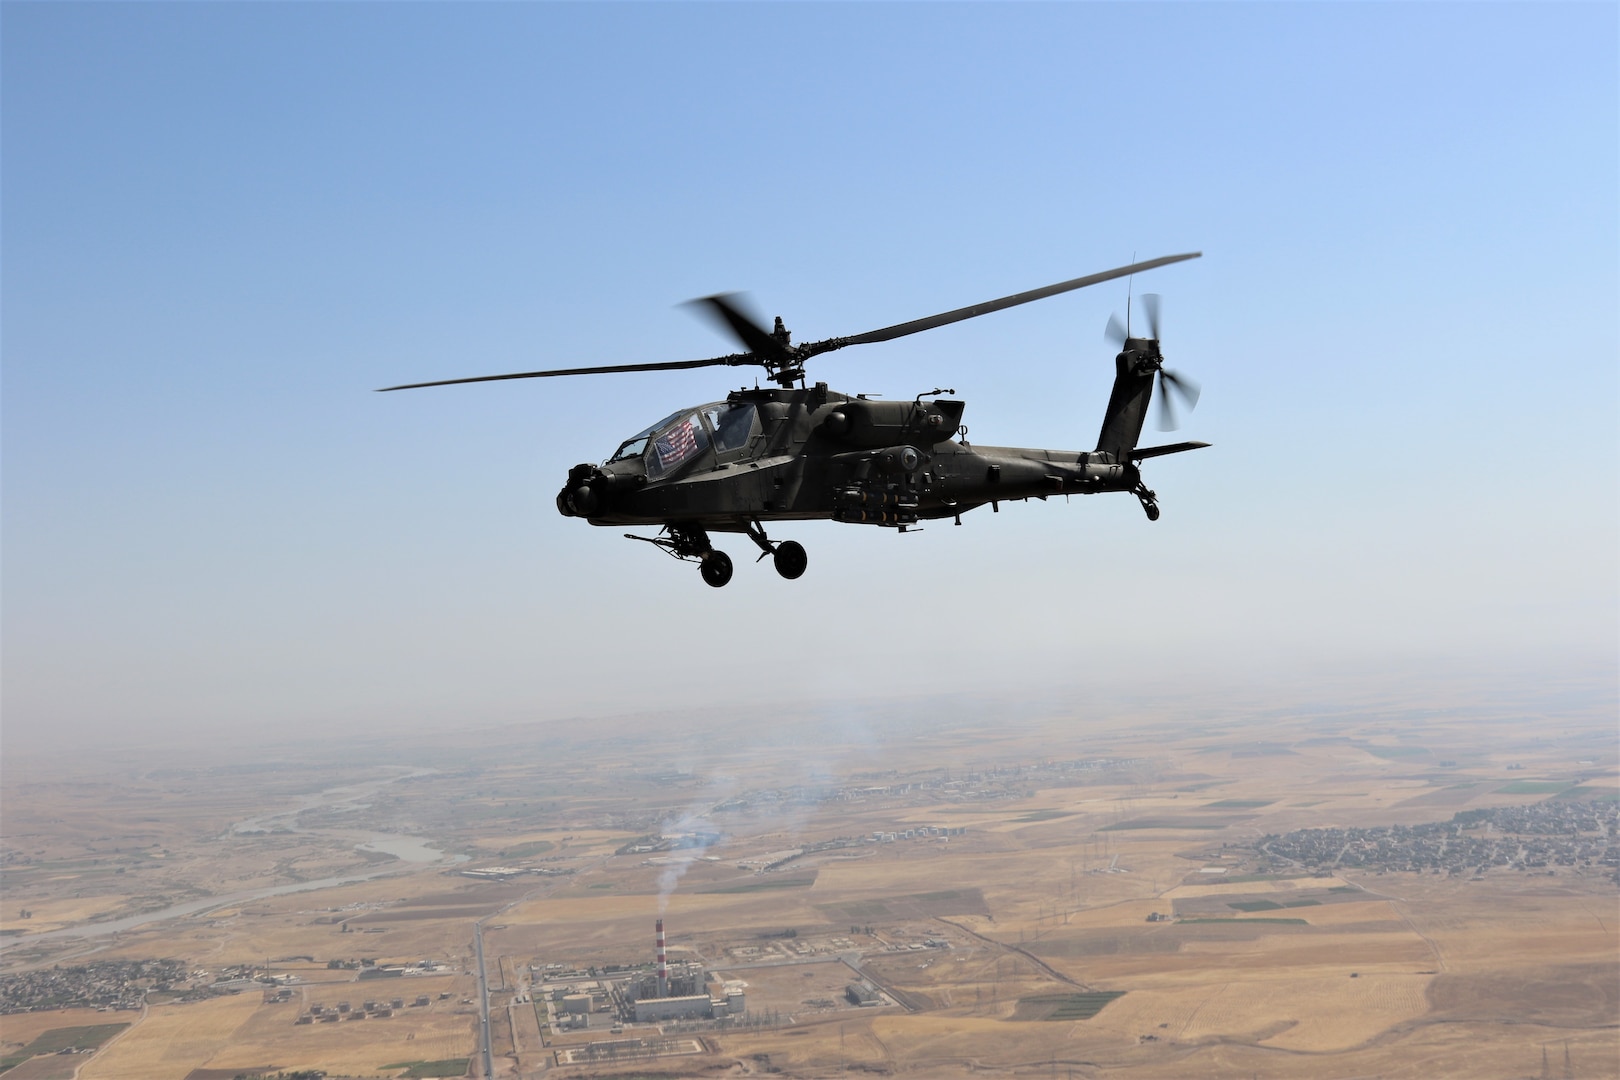 A U.S. Army AH-64 Apache attack helicopter from Task Force Wolfpack, 1st Attack Battalion, 82nd Combat Aviation Brigade, flies over northern Iraq. Wolfpack's highly lethal Apaches serve as air weapons teams on 24-hour alert. They also provide overwatch during ground operations, convoy escort and reconnaissance in support of base defense.